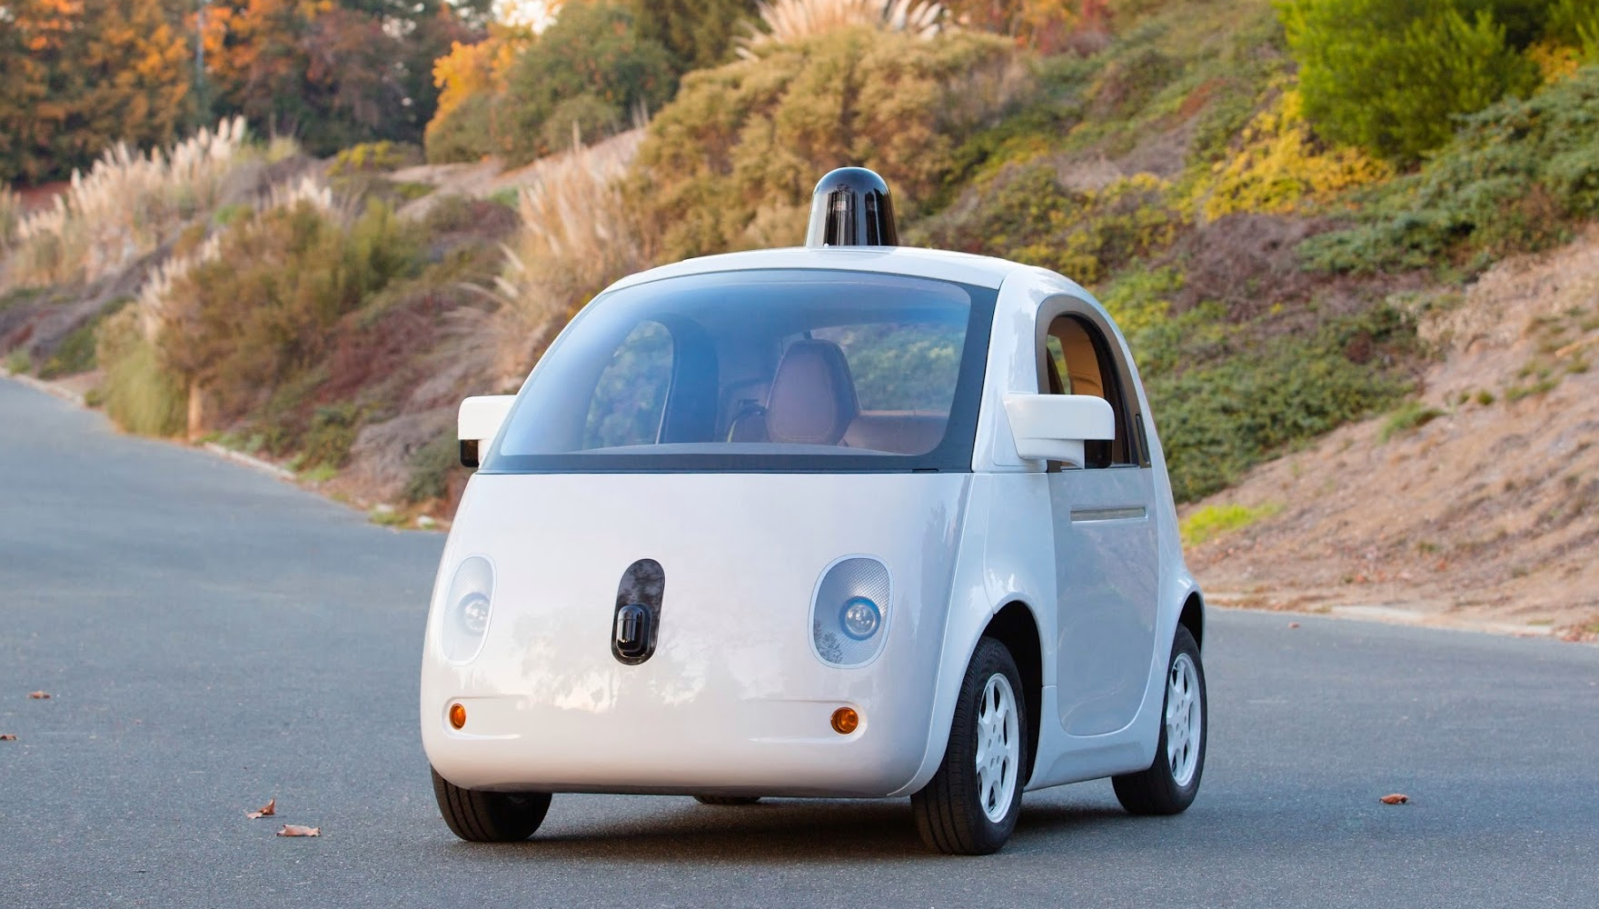 Google moving towards wider production of its electric selfdriving